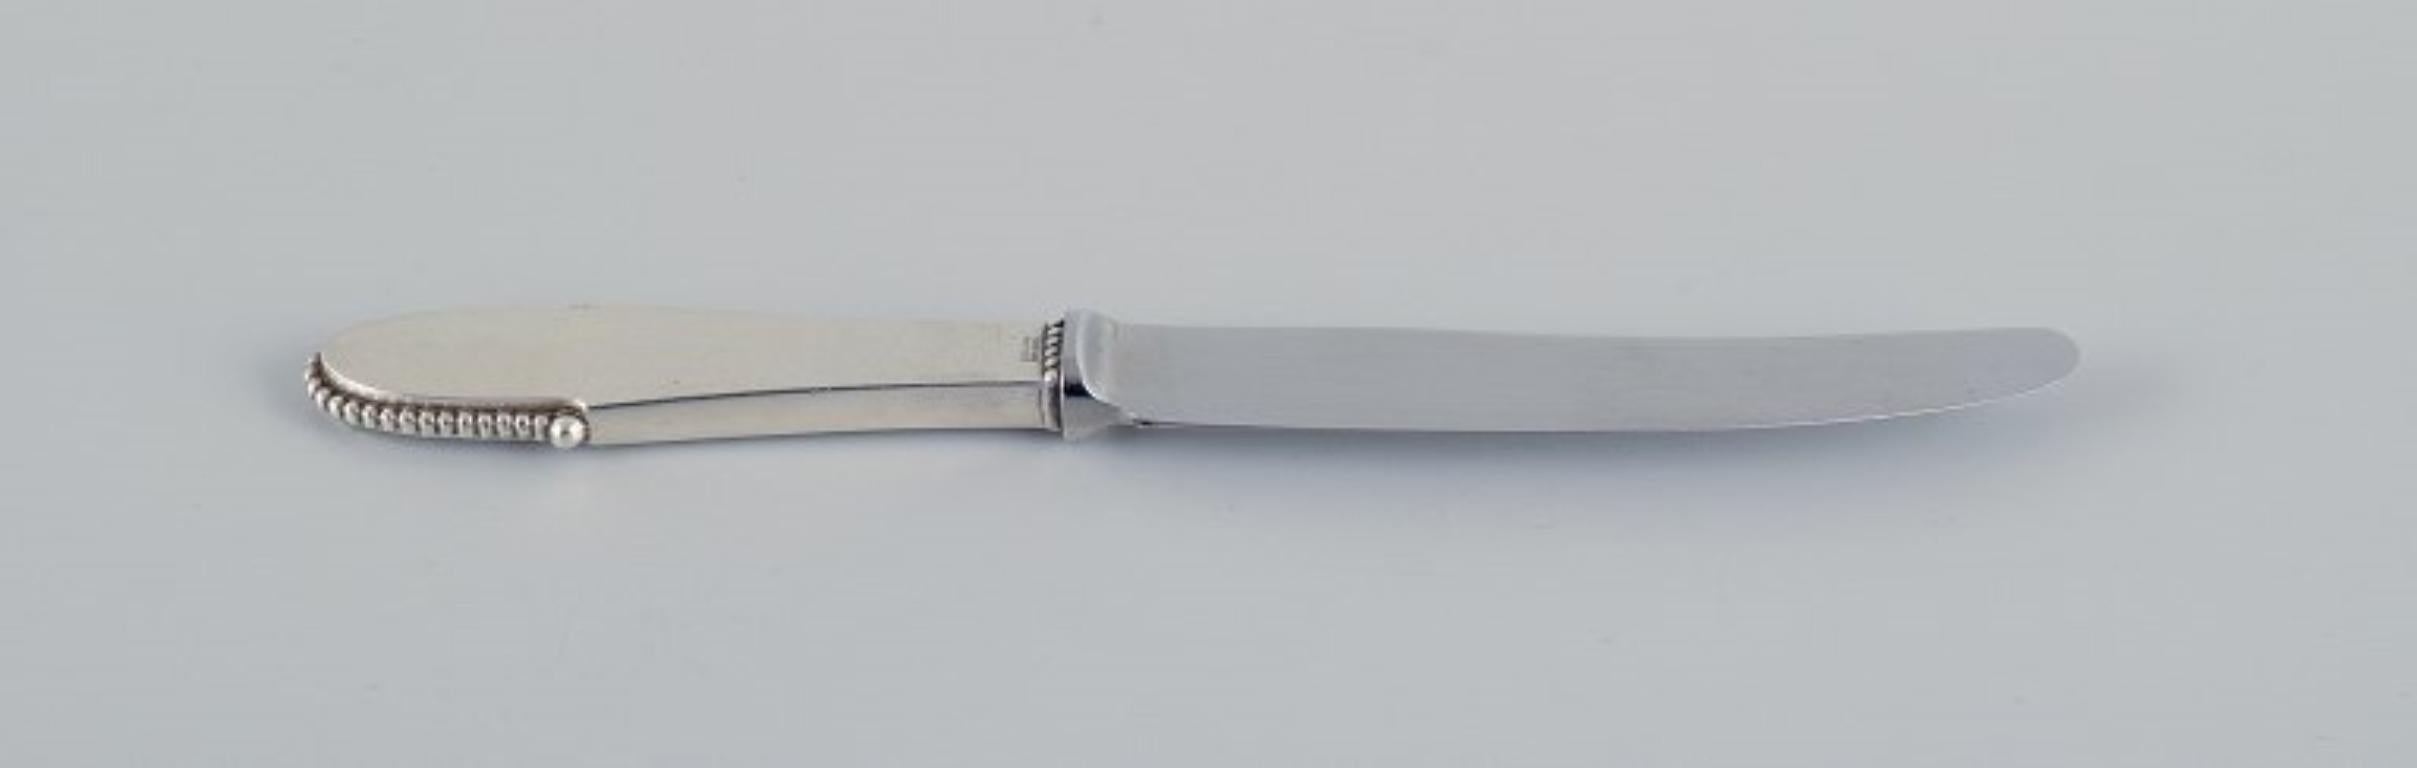 Georg Jensen Beaded.
A set of ten fruit knives in sterling silver. Stainless steel blade.
Post 1945 hallmark.
In excellent condition.
Measurements: L 16.6 cm.